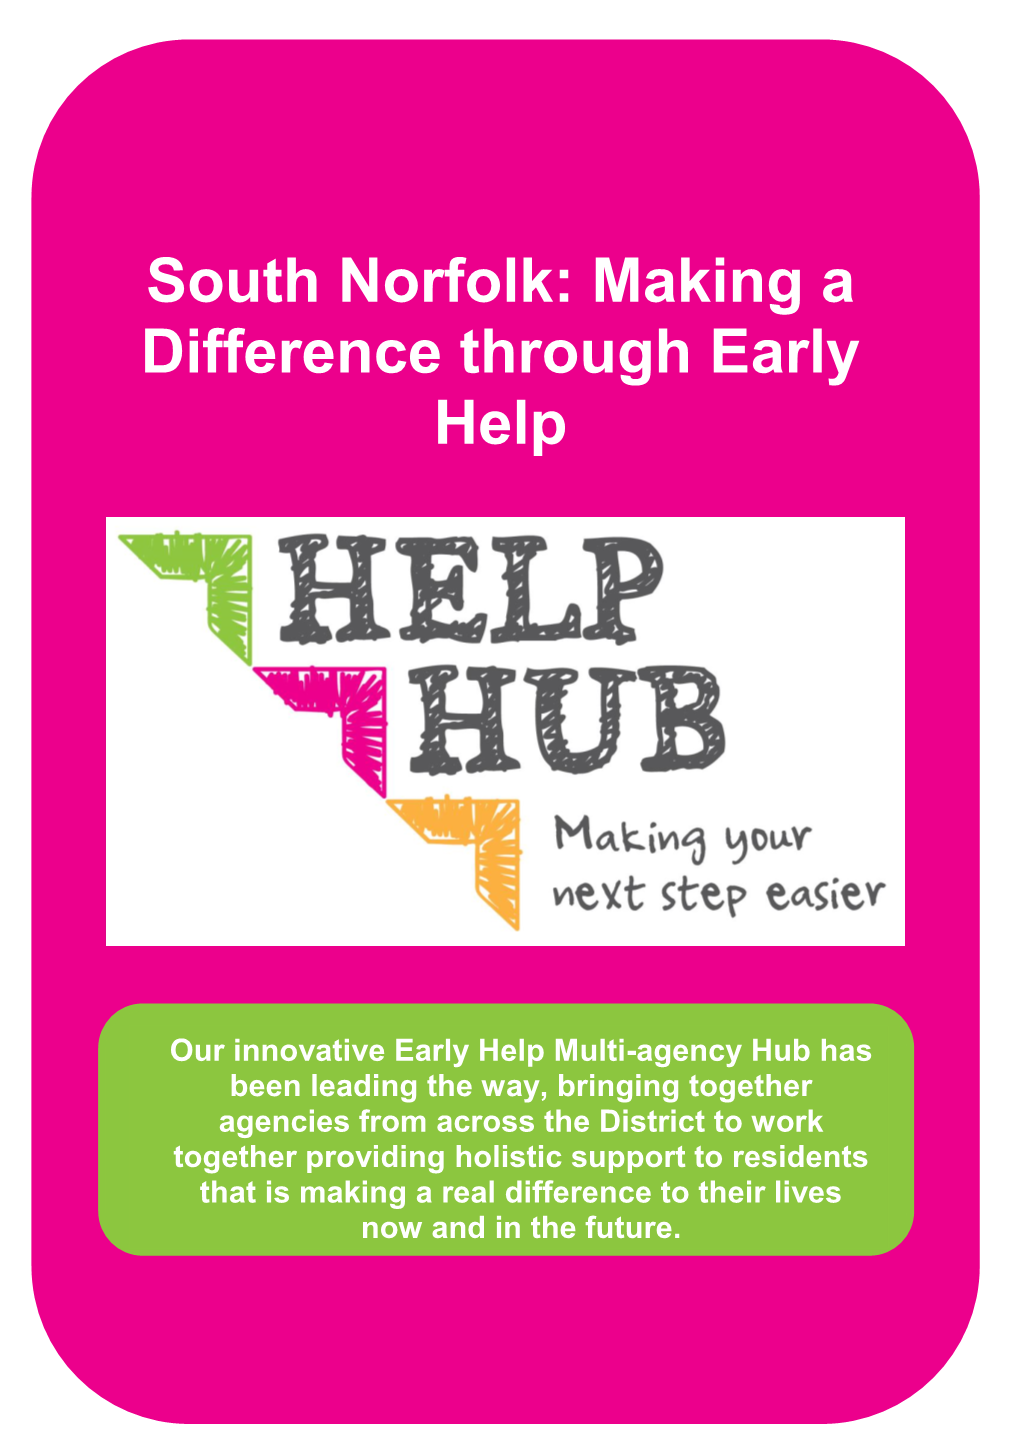 South Norfolk: Making a Difference Through Early Help